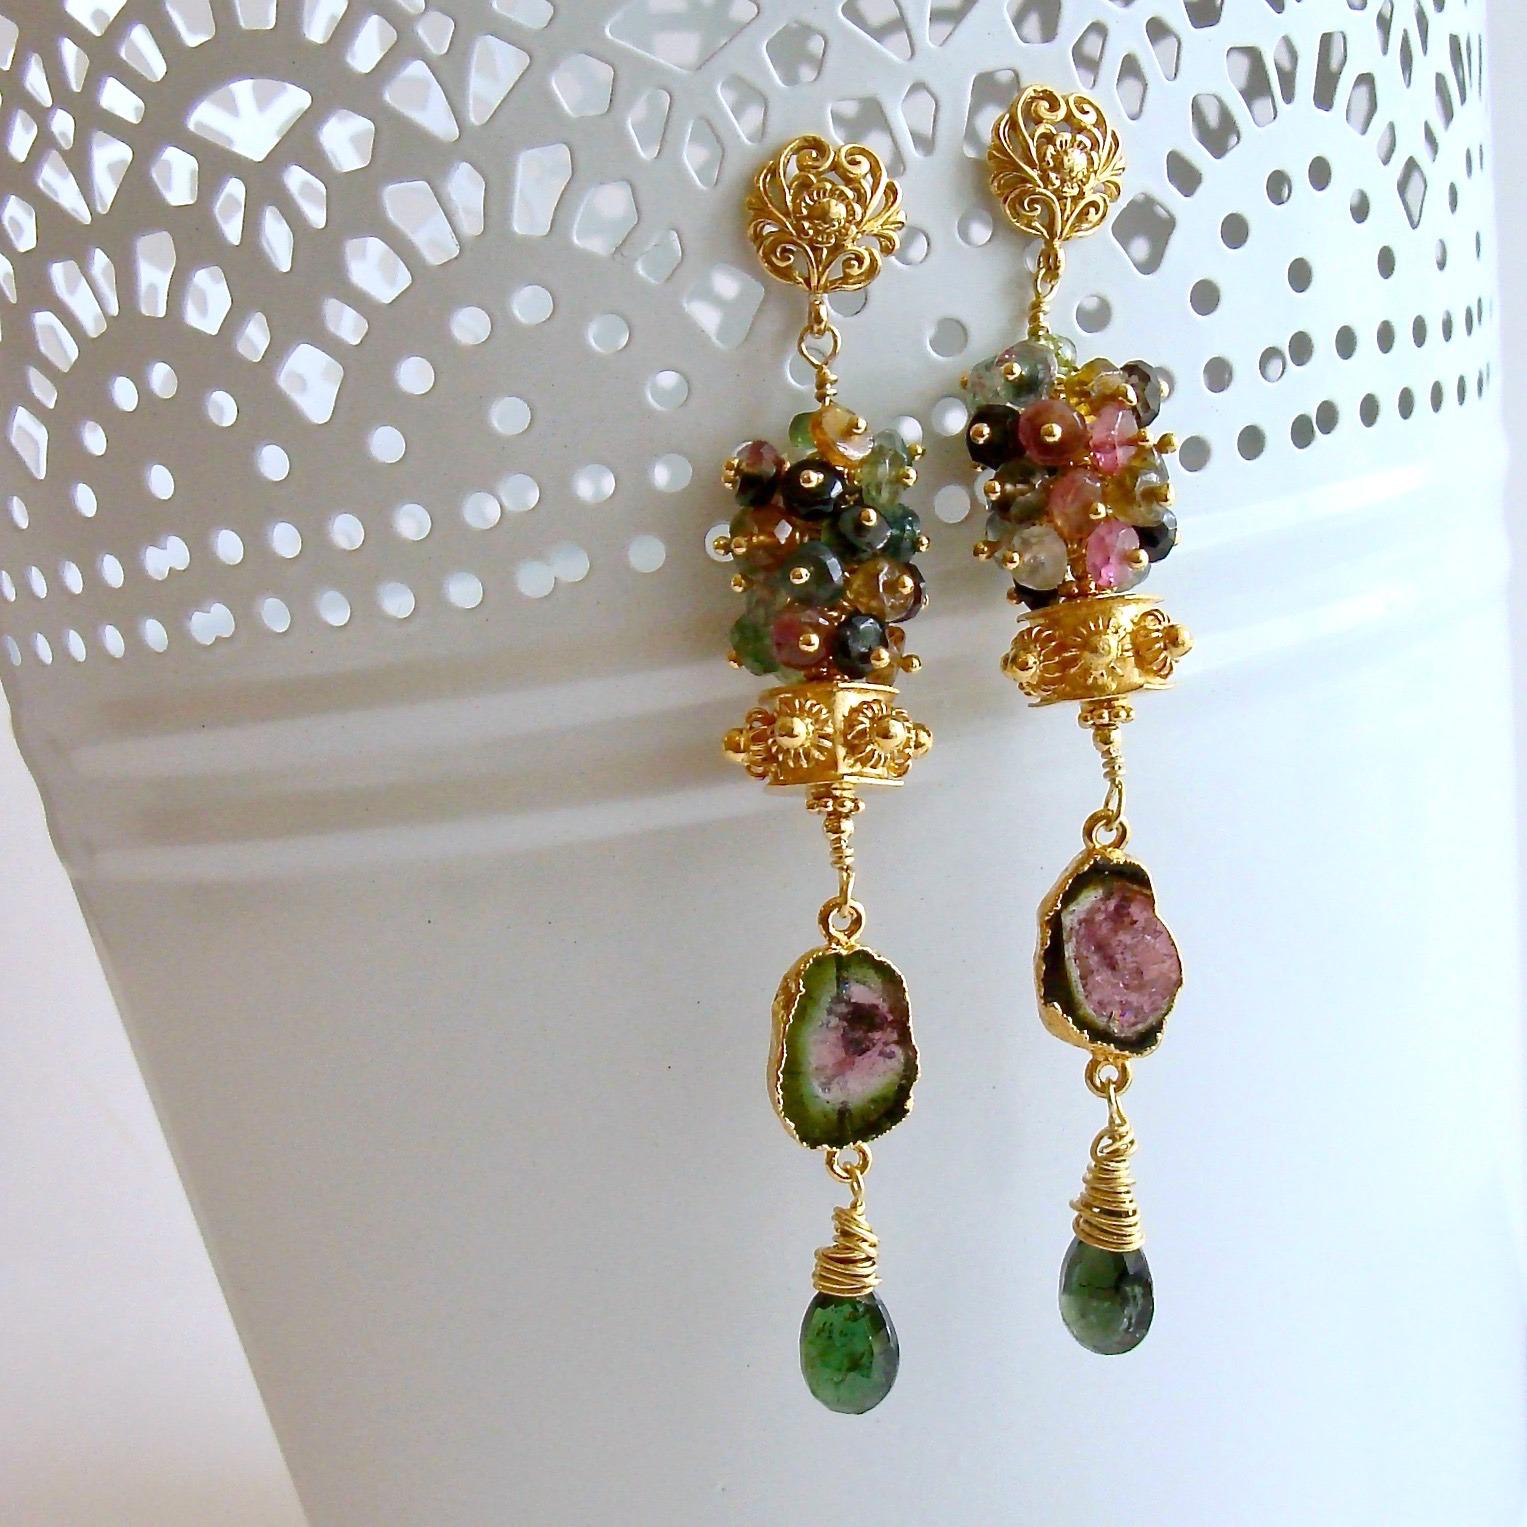 A generous cluster of multi-colored tourmaline rondelles crowns a hexagonal gold vermeil cannetille bead, while coveted watermelon tourmaline slices  and green tourmaline wrapped briolettes dangle sweetly below.  The design is suspended from